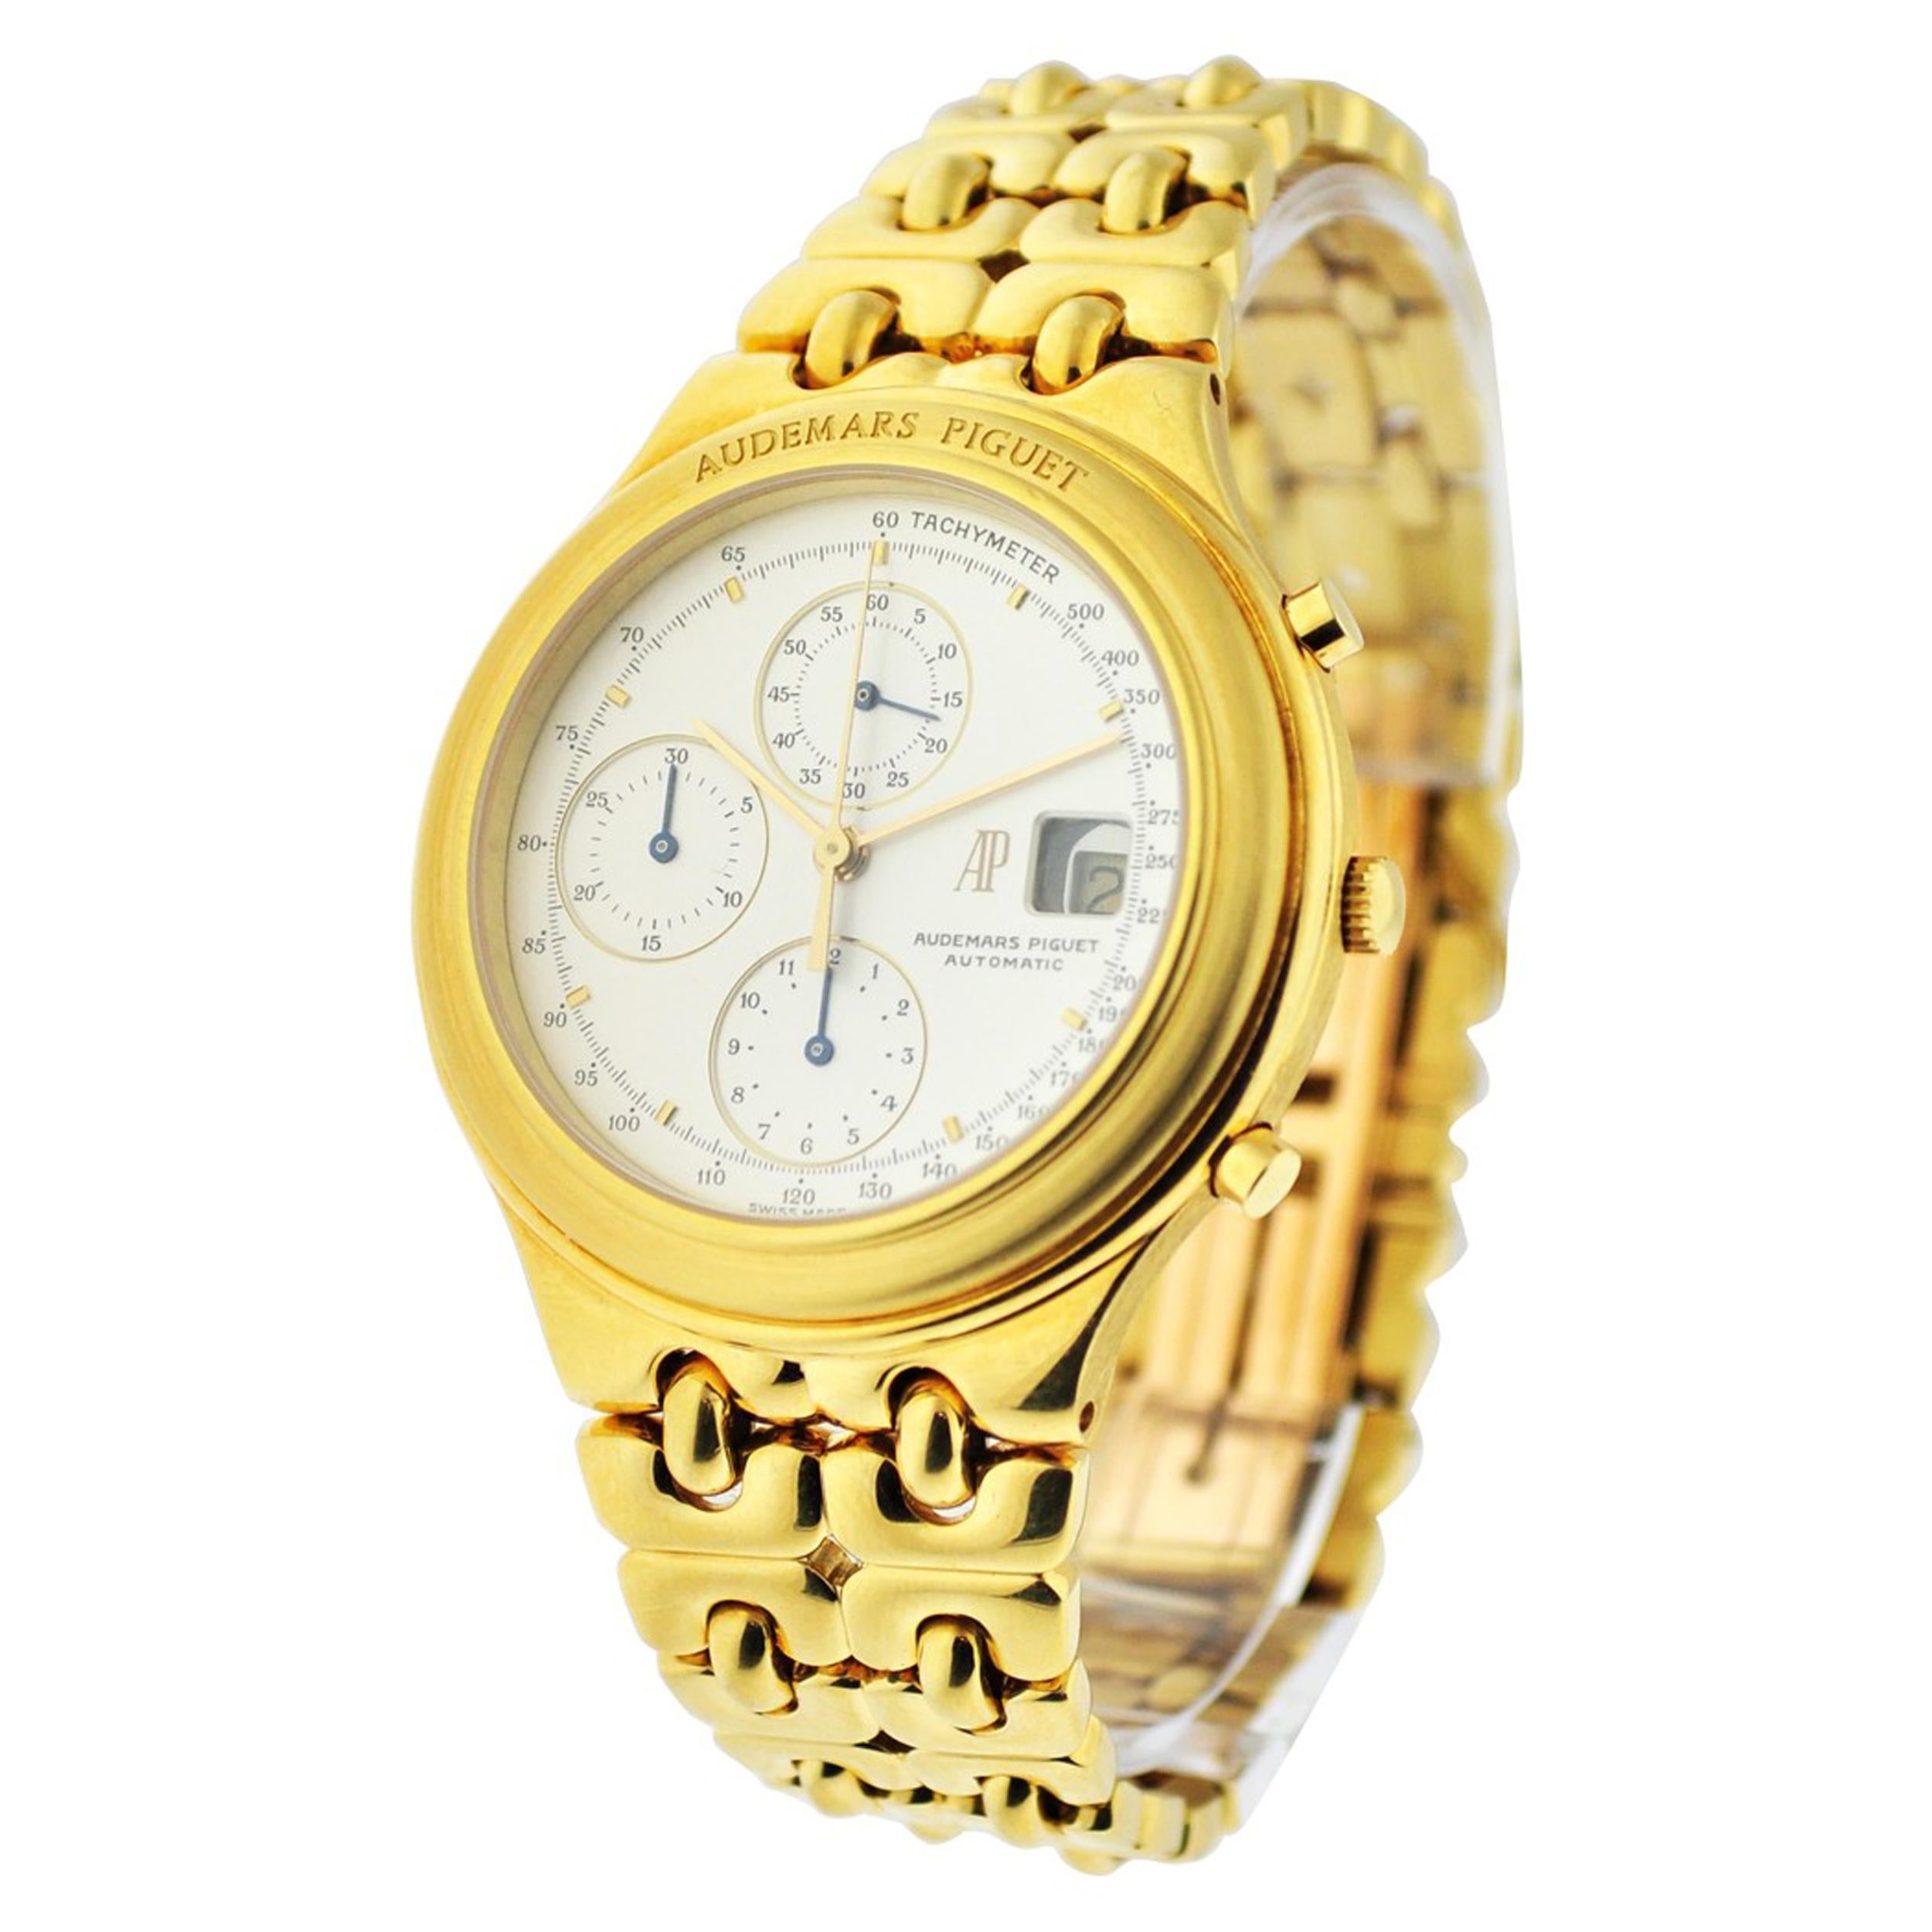 Movement: automatic
Function: hours, minutes, seconds, date, chronograph 
Case: 41mm 18K yellow gold case, smooth bezel, sapphire crystal, push pull crown
Band: 18K yellow gold huitieme bracelet, fold over clasp
Dial: white chronograph
Reference: